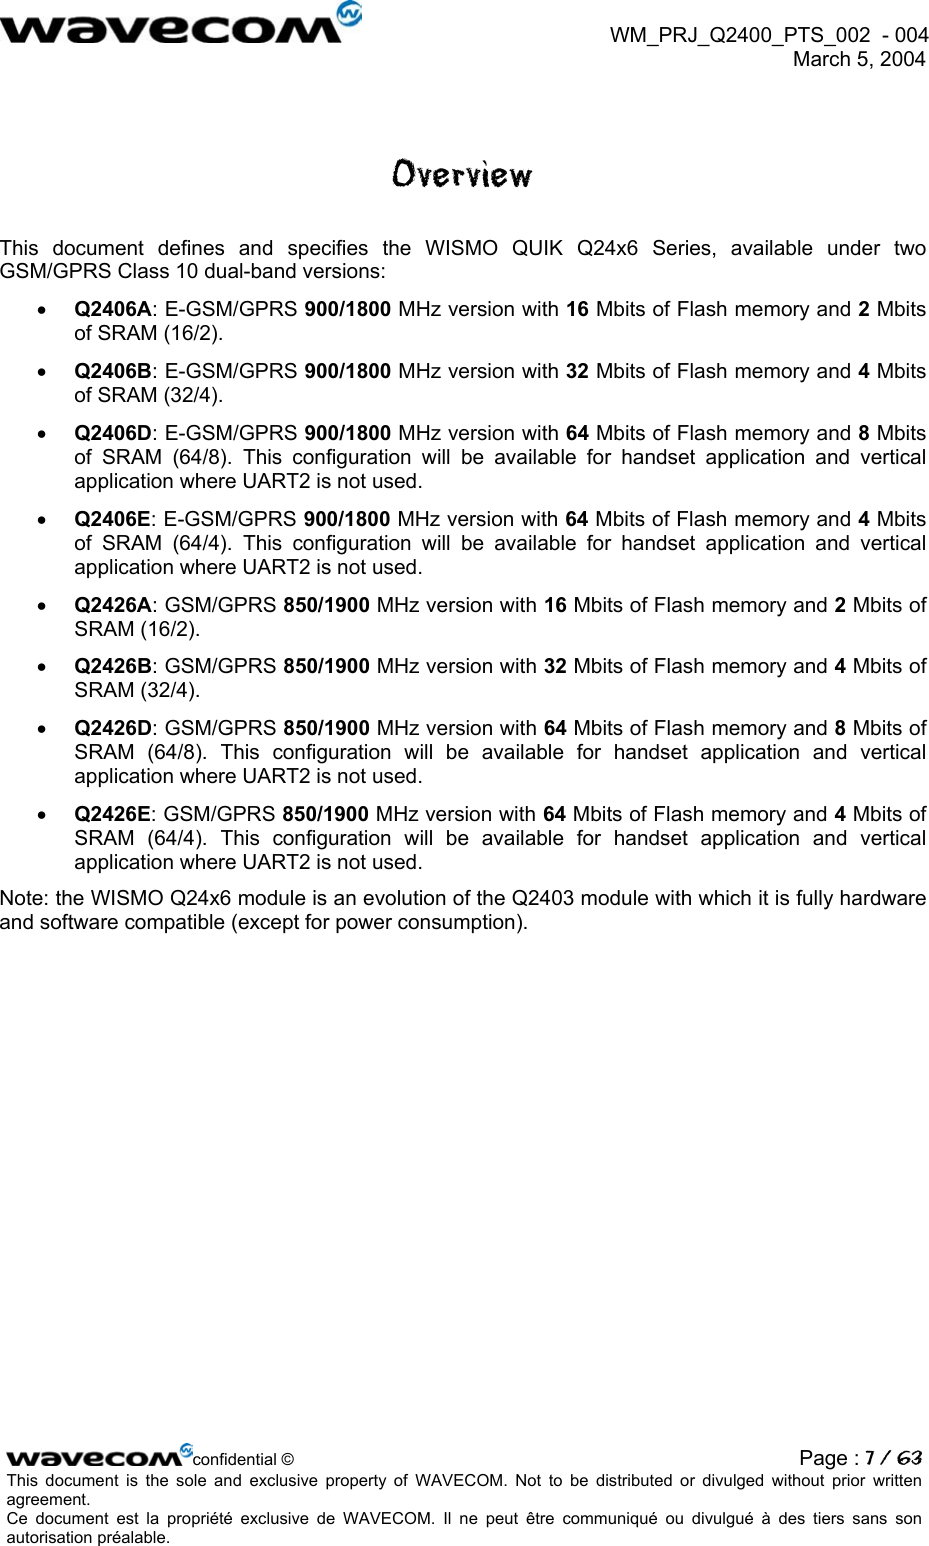  WM_PRJ_Q2400_PTS_002  - 004  March 5, 2004   Overview This document defines and specifies the WISMO QUIK Q24x6 Series, available under two GSM/GPRS Class 10 dual-band versions: •  Q2406A: E-GSM/GPRS 900/1800 MHz version with 16 Mbits of Flash memory and 2 Mbits of SRAM (16/2). •  Q2406B: E-GSM/GPRS 900/1800 MHz version with 32 Mbits of Flash memory and 4 Mbits of SRAM (32/4). •  Q2406D: E-GSM/GPRS 900/1800 MHz version with 64 Mbits of Flash memory and 8 Mbits of SRAM (64/8). This configuration will be available for handset application and vertical application where UART2 is not used. •  Q2406E: E-GSM/GPRS 900/1800 MHz version with 64 Mbits of Flash memory and 4 Mbits of SRAM (64/4). This configuration will be available for handset application and vertical application where UART2 is not used. •  Q2426A: GSM/GPRS 850/1900 MHz version with 16 Mbits of Flash memory and 2 Mbits of SRAM (16/2). •  Q2426B: GSM/GPRS 850/1900 MHz version with 32 Mbits of Flash memory and 4 Mbits of SRAM (32/4). •  Q2426D: GSM/GPRS 850/1900 MHz version with 64 Mbits of Flash memory and 8 Mbits of SRAM (64/8). This configuration will be available for handset application and vertical application where UART2 is not used. •  Q2426E: GSM/GPRS 850/1900 MHz version with 64 Mbits of Flash memory and 4 Mbits of SRAM (64/4). This configuration will be available for handset application and vertical application where UART2 is not used. Note: the WISMO Q24x6 module is an evolution of the Q2403 module with which it is fully hardware and software compatible (except for power consumption).     confidential © Page : 7 / 63This document is the sole and exclusive property of WAVECOM. Not to be distributed or divulged without prior written agreement.  Ce document est la propriété exclusive de WAVECOM. Il ne peut être communiqué ou divulgué à des tiers sans son autorisation préalable.  